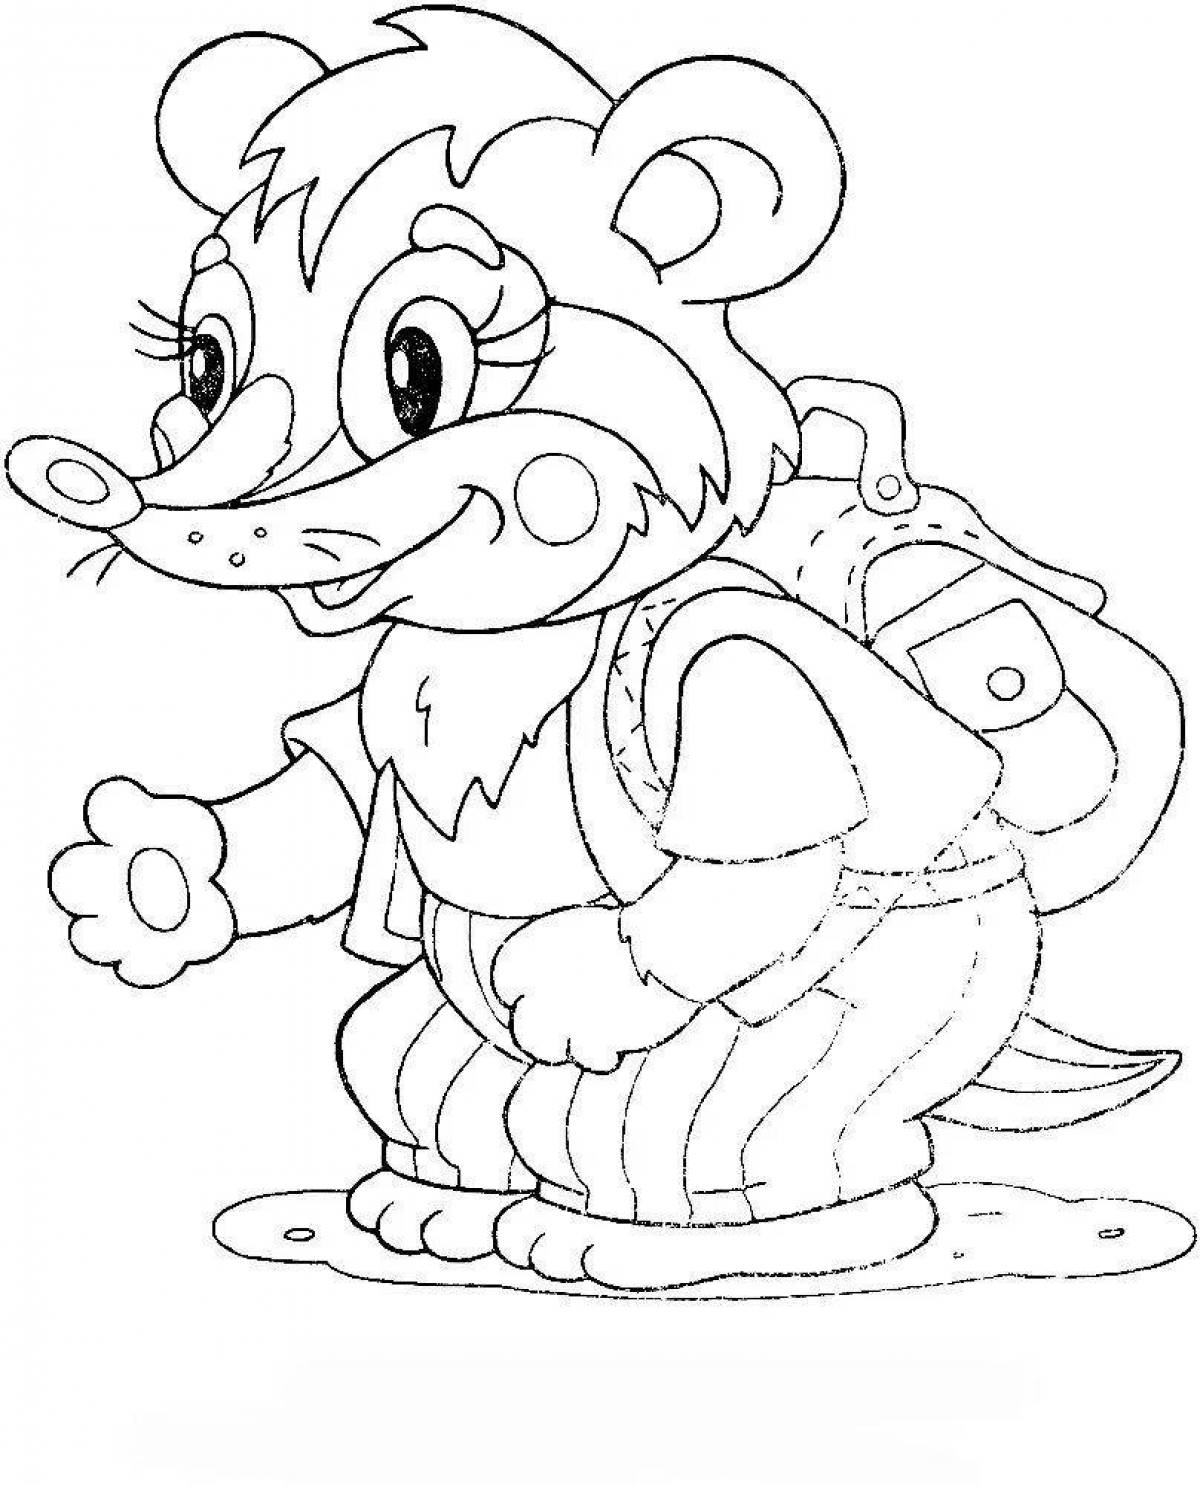 Funny animal coloring pages